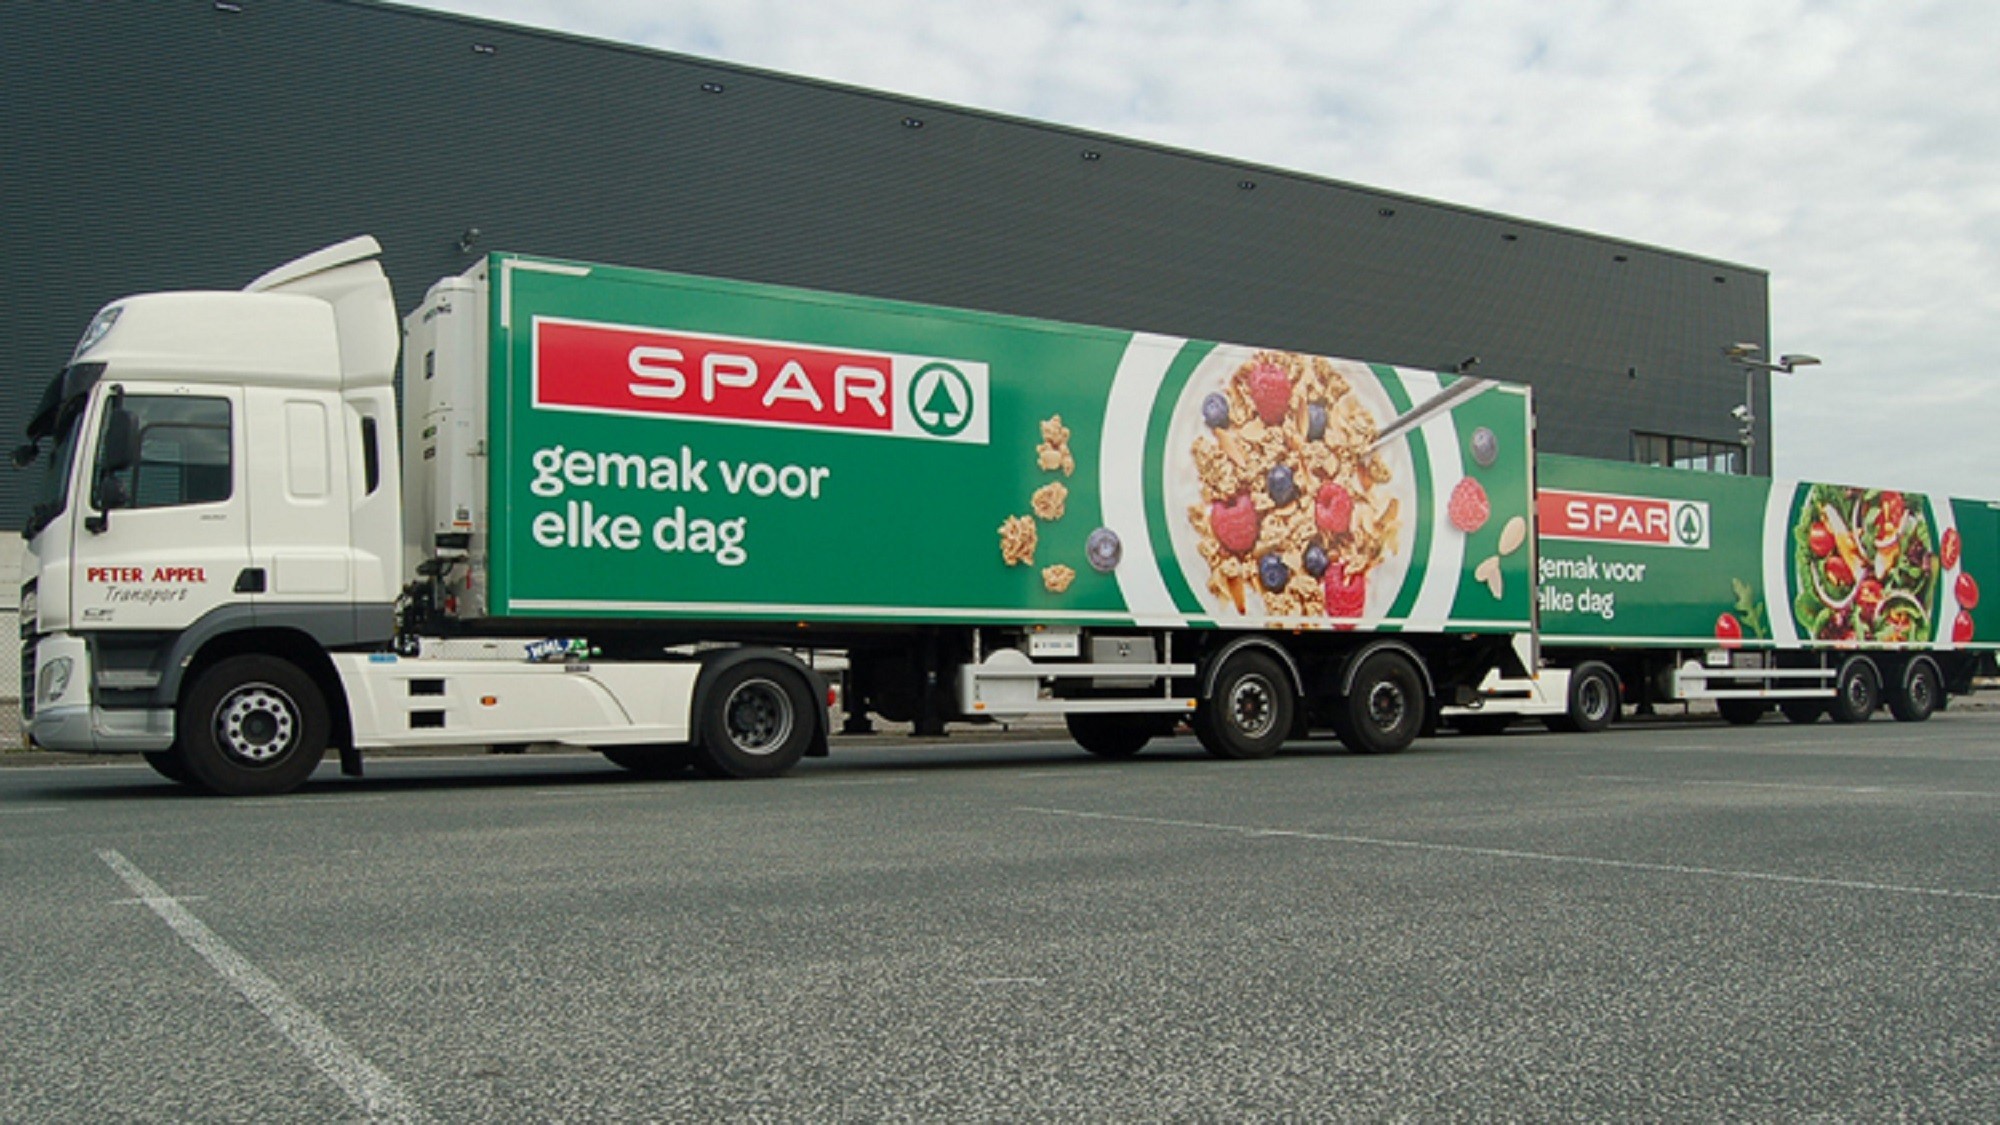 NL-2-Newly-branded-SPAR-trucks-have-been-rolled-out-in-the-Netherlands-750x500